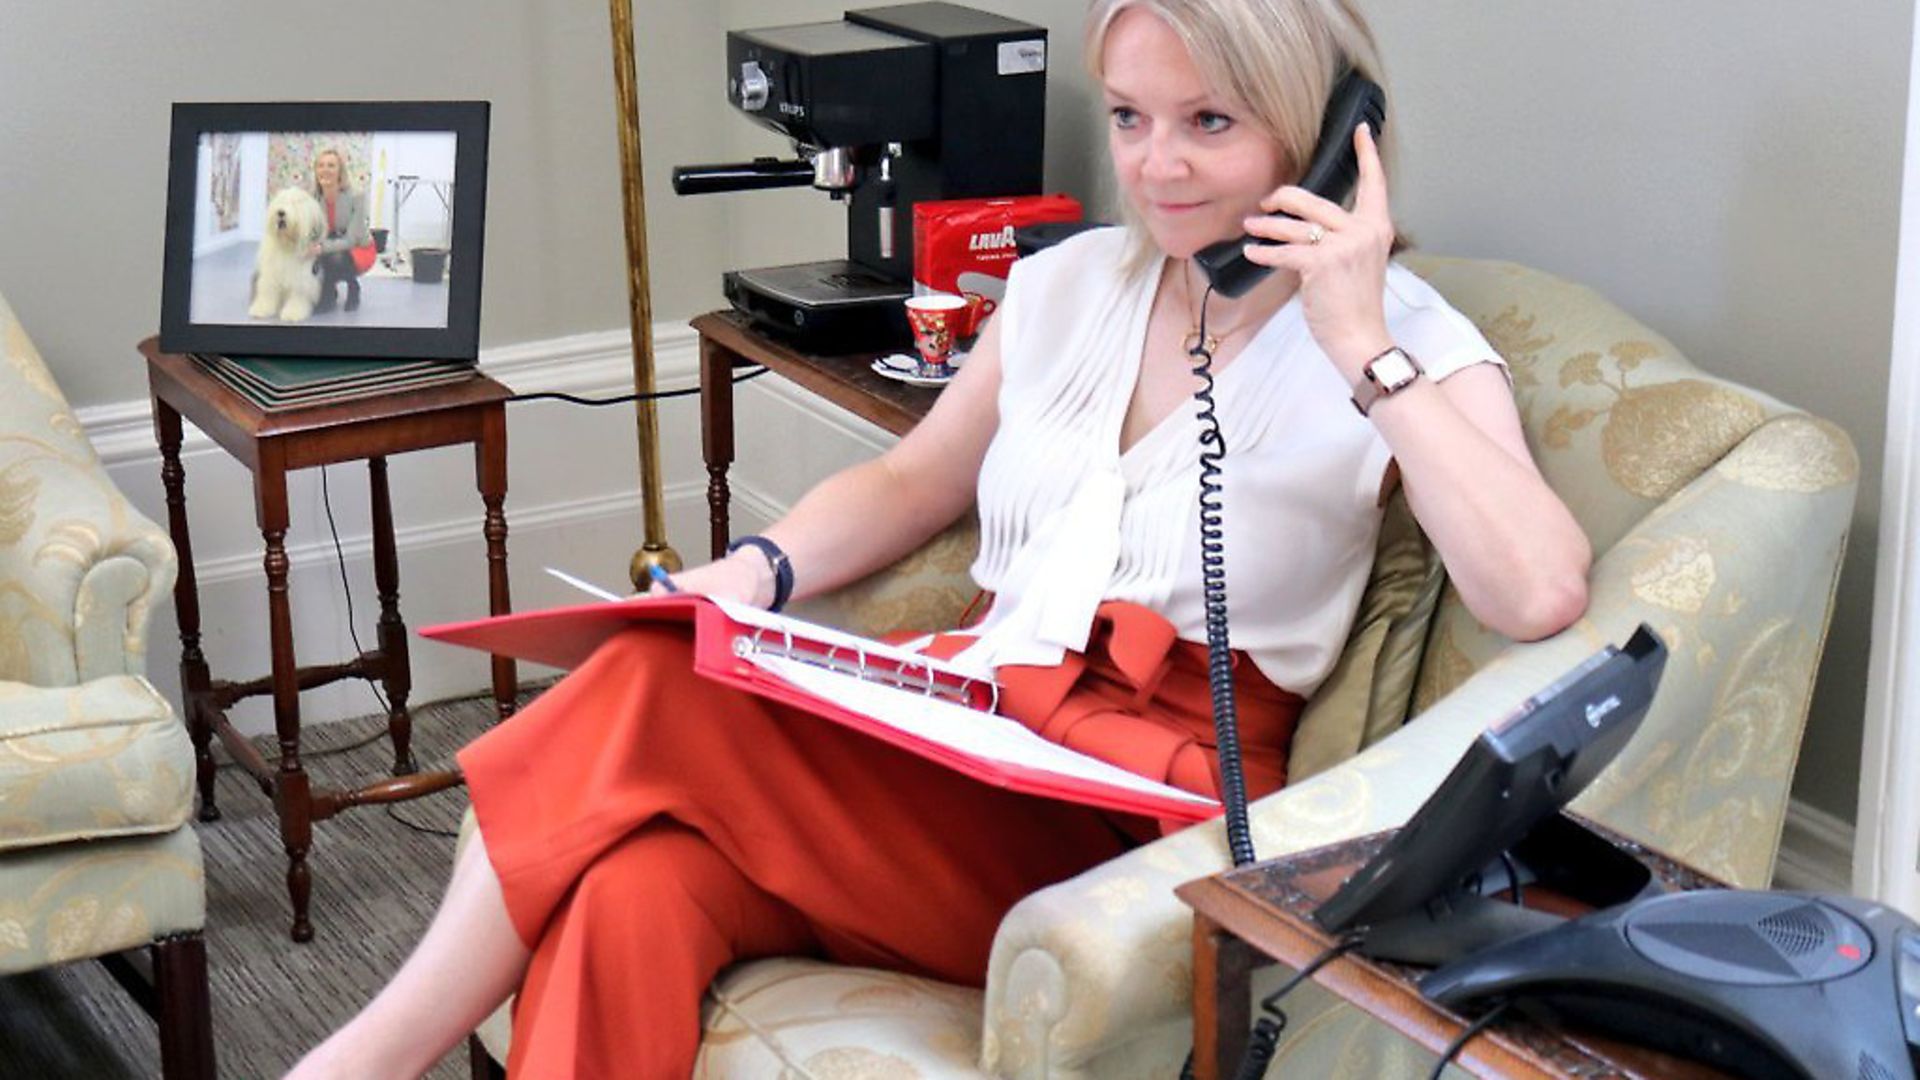 International trade secretary Liz Truss on the phone, attempting to make international trade deals, of which she appears to have made roughly 3.5. Picture: Liz Truss - Credit: Liz Truss